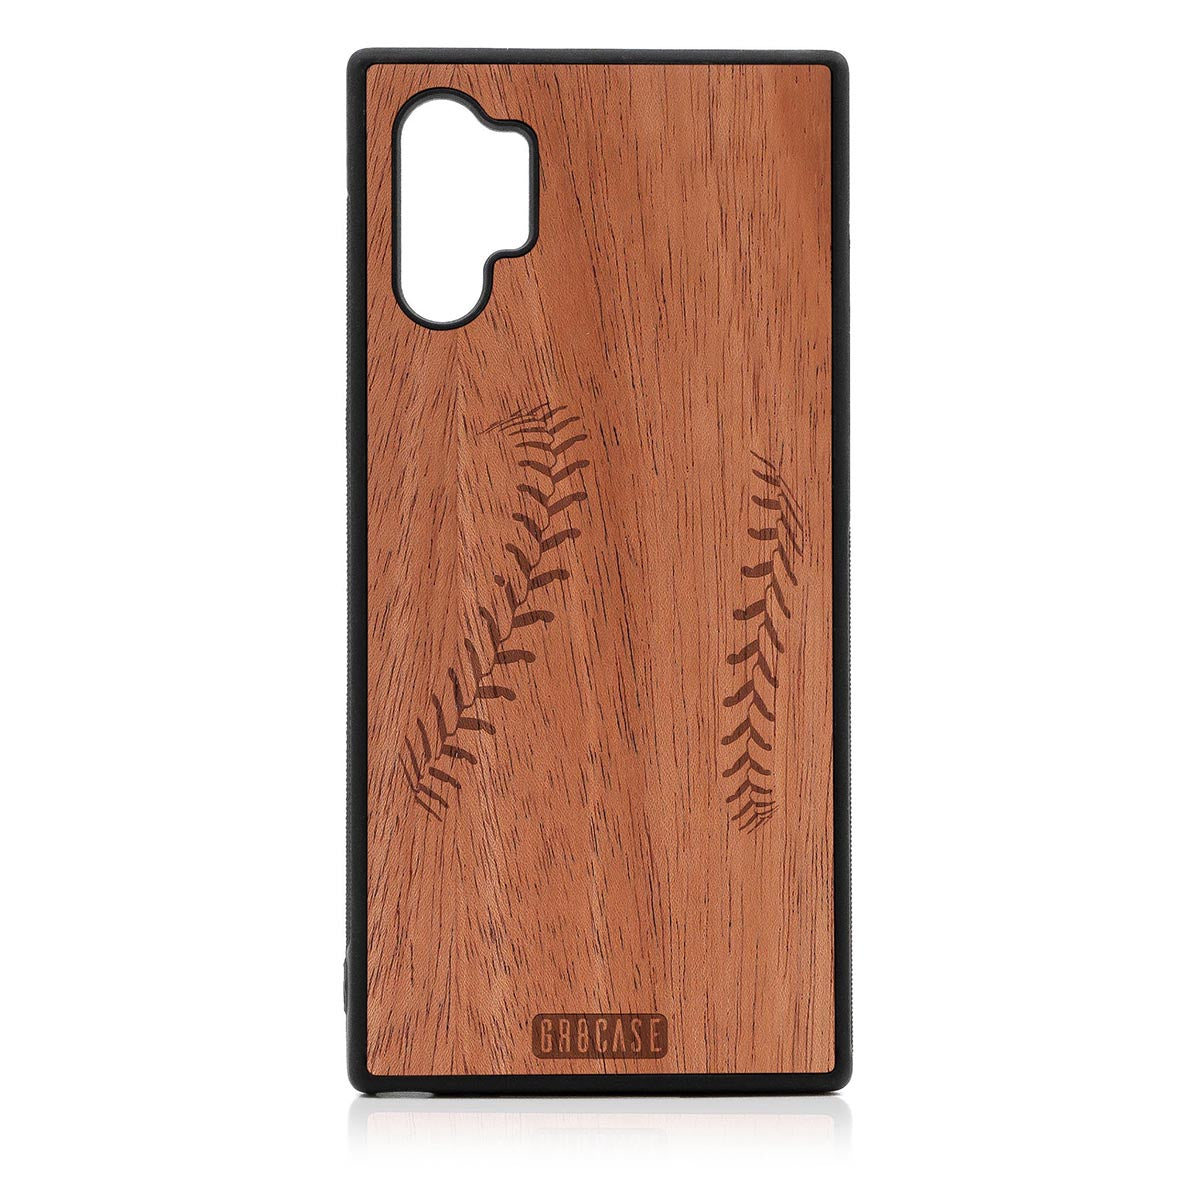 Baseball Stitches Design Wood Case For Samsung Galaxy Note 10 Plus by GR8CASE